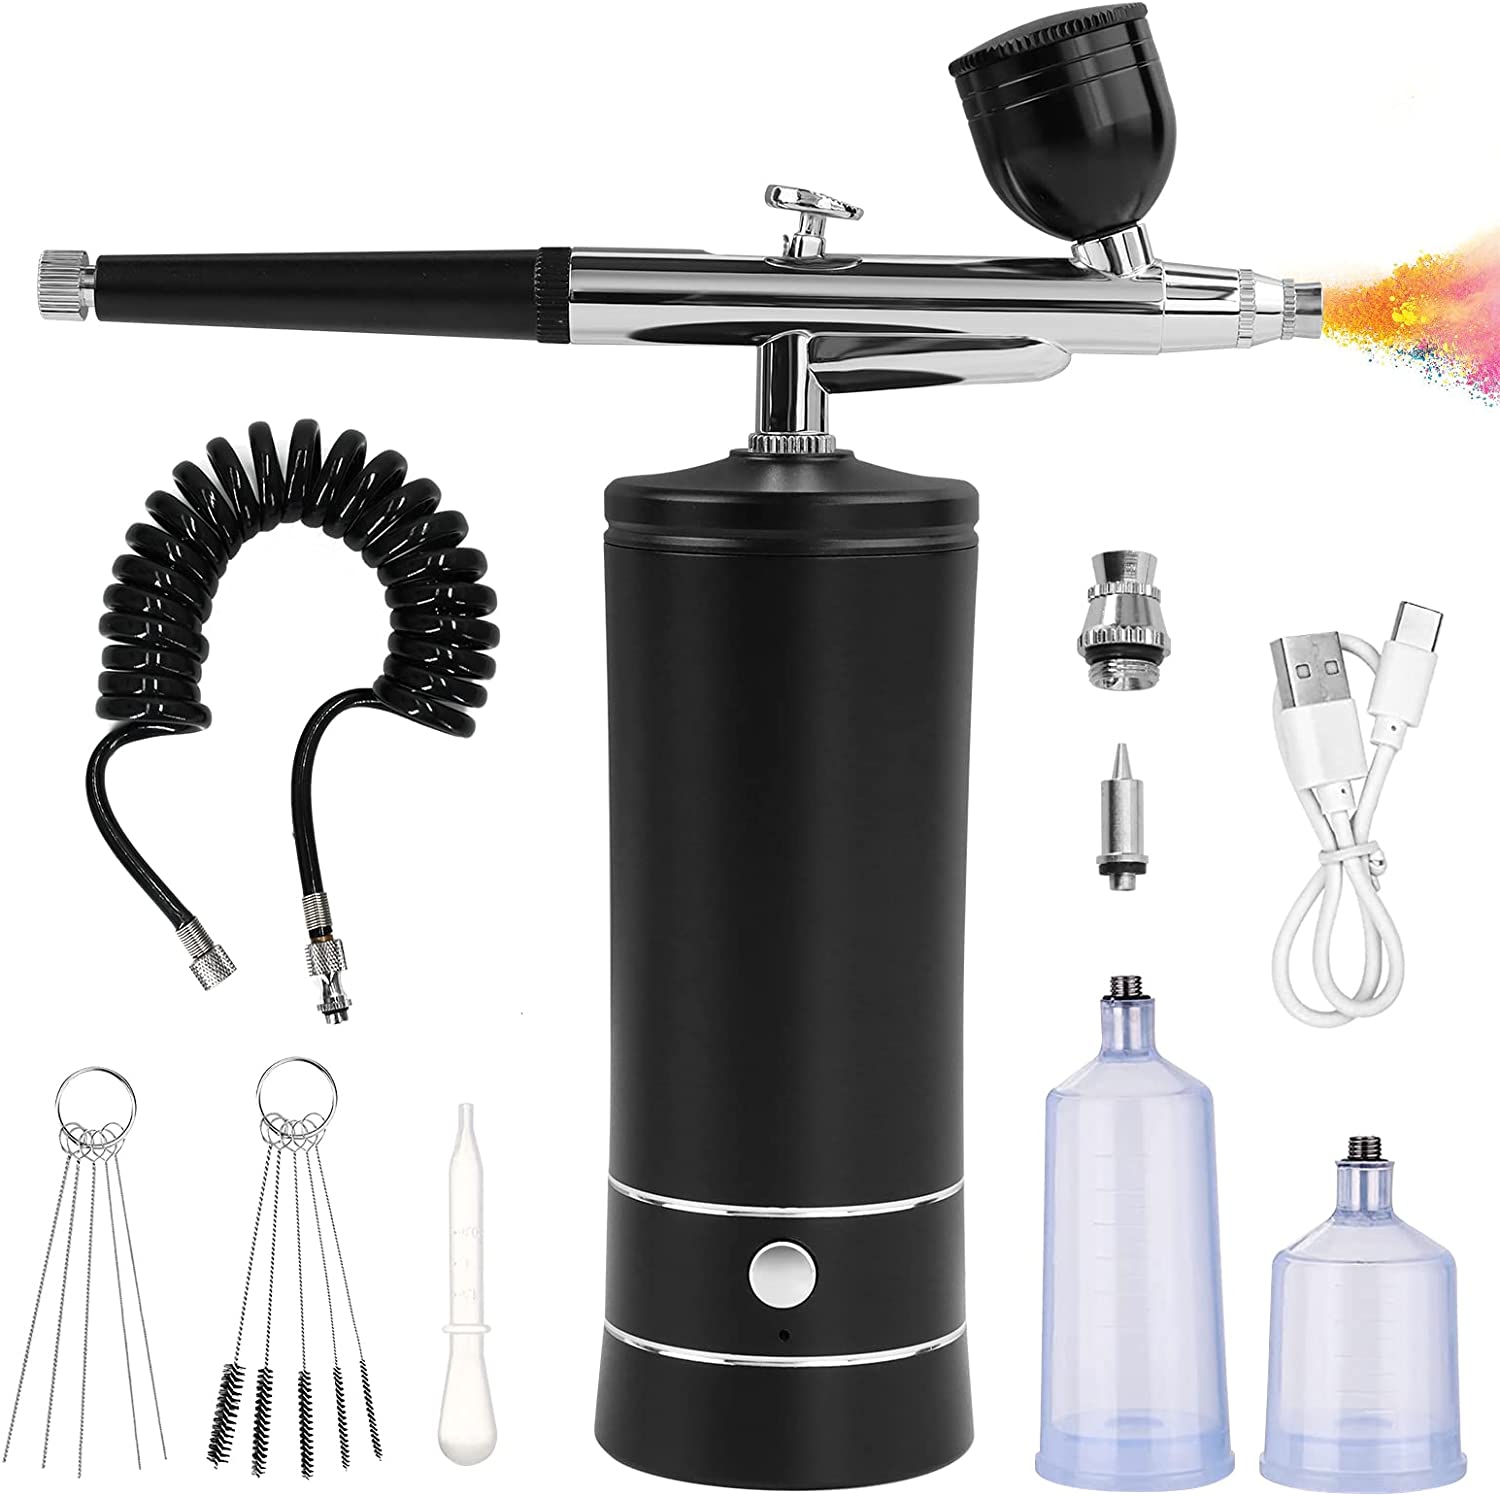 Airbrush Kit for Nails, Yekavo Double Action Air Brush Painting